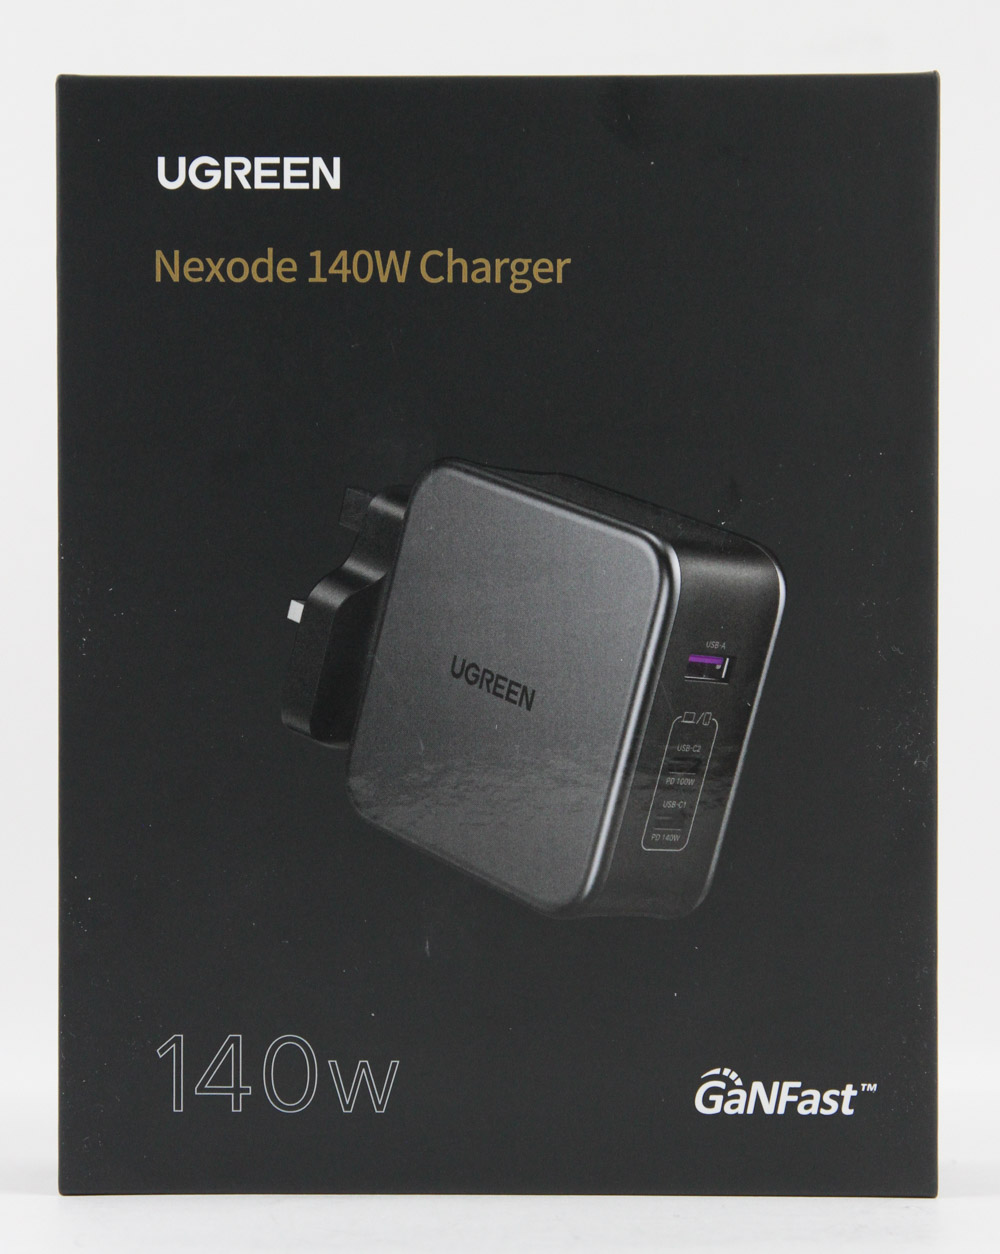 Review of the Ugreen Nexode 140W Charger - TurboFuture